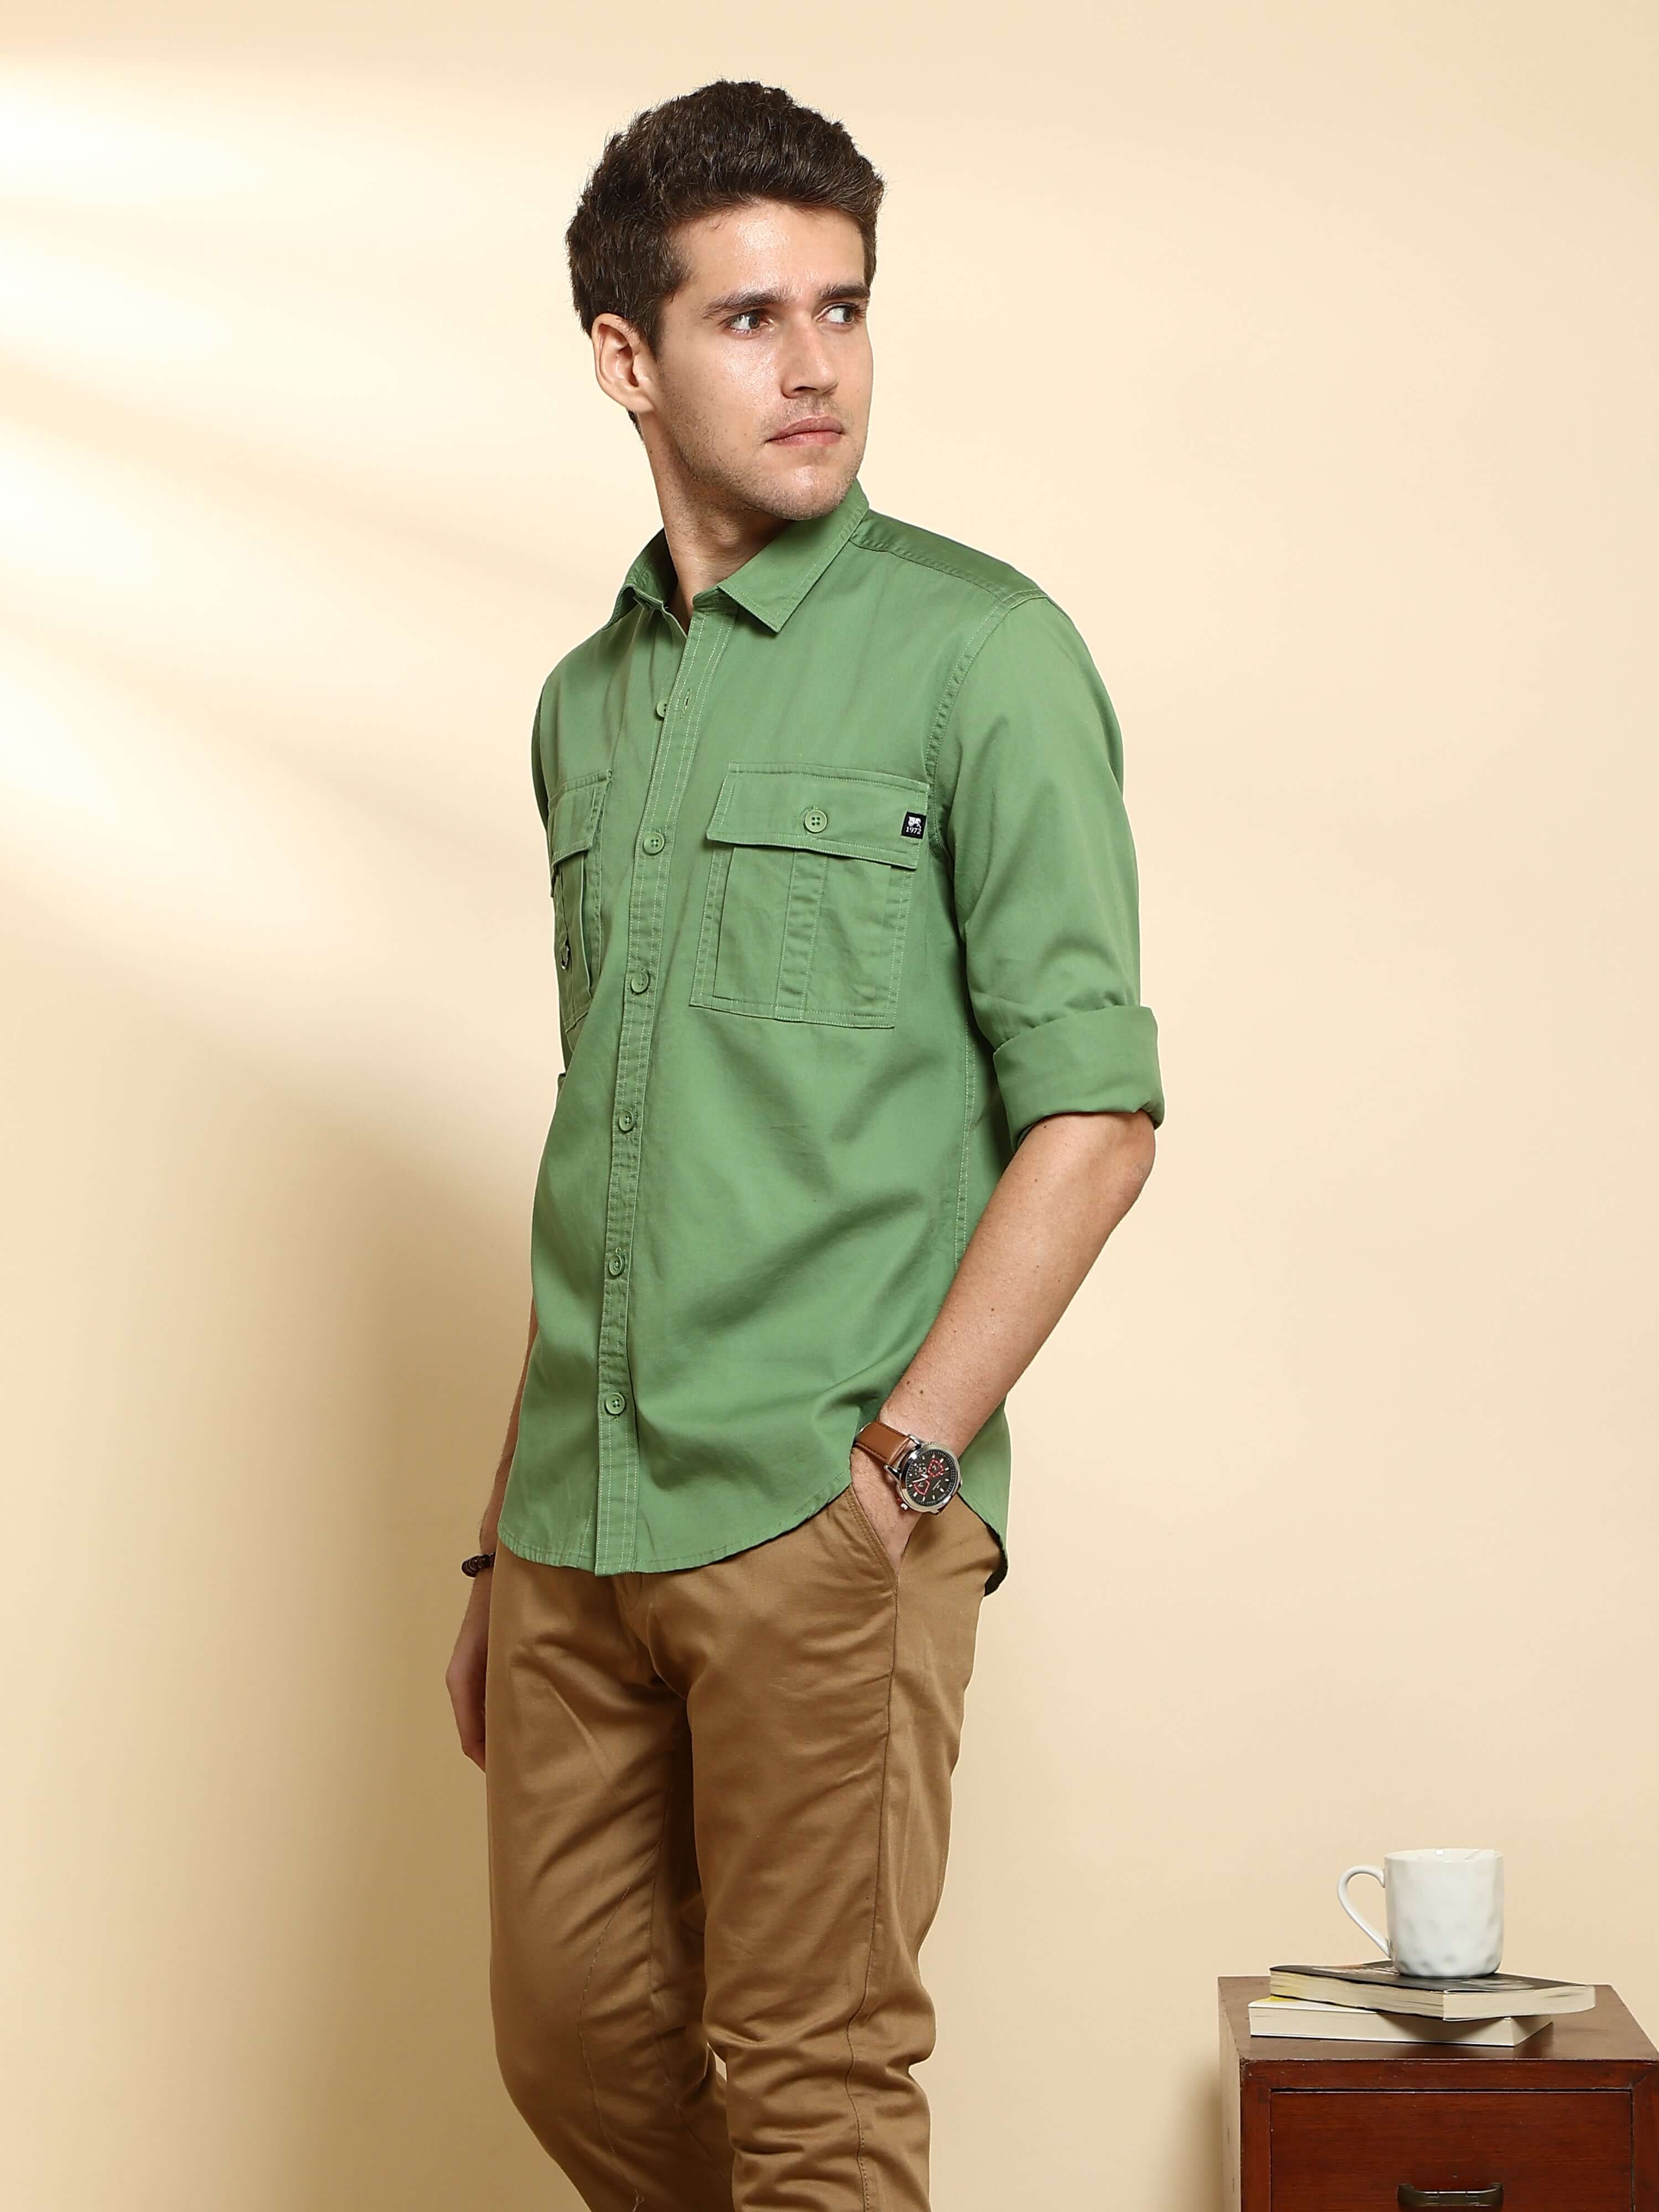 Green Cargo casual full sleeve shirt shop online at Estilocus. • 100% PREMIUM COTTON • Full-sleeve solid shirt• Cut and sew placket• Regular collar• Double button round cuffs.• Double pocket with flap• Curved hemline• Finest quality sewing with all double